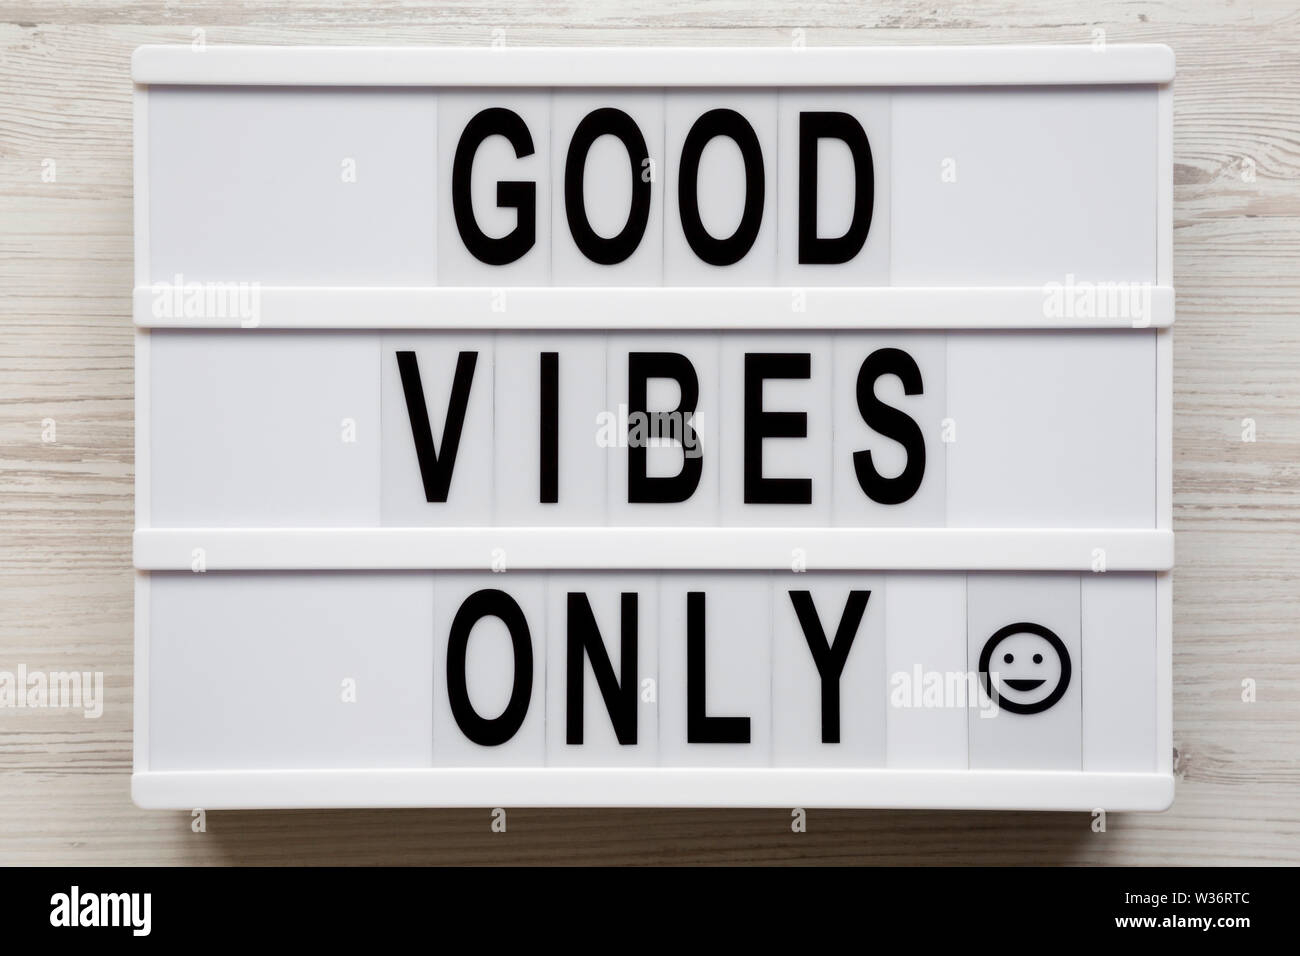 Good Vibes Only Images – Browse 1,816 Stock Photos, Vectors, and